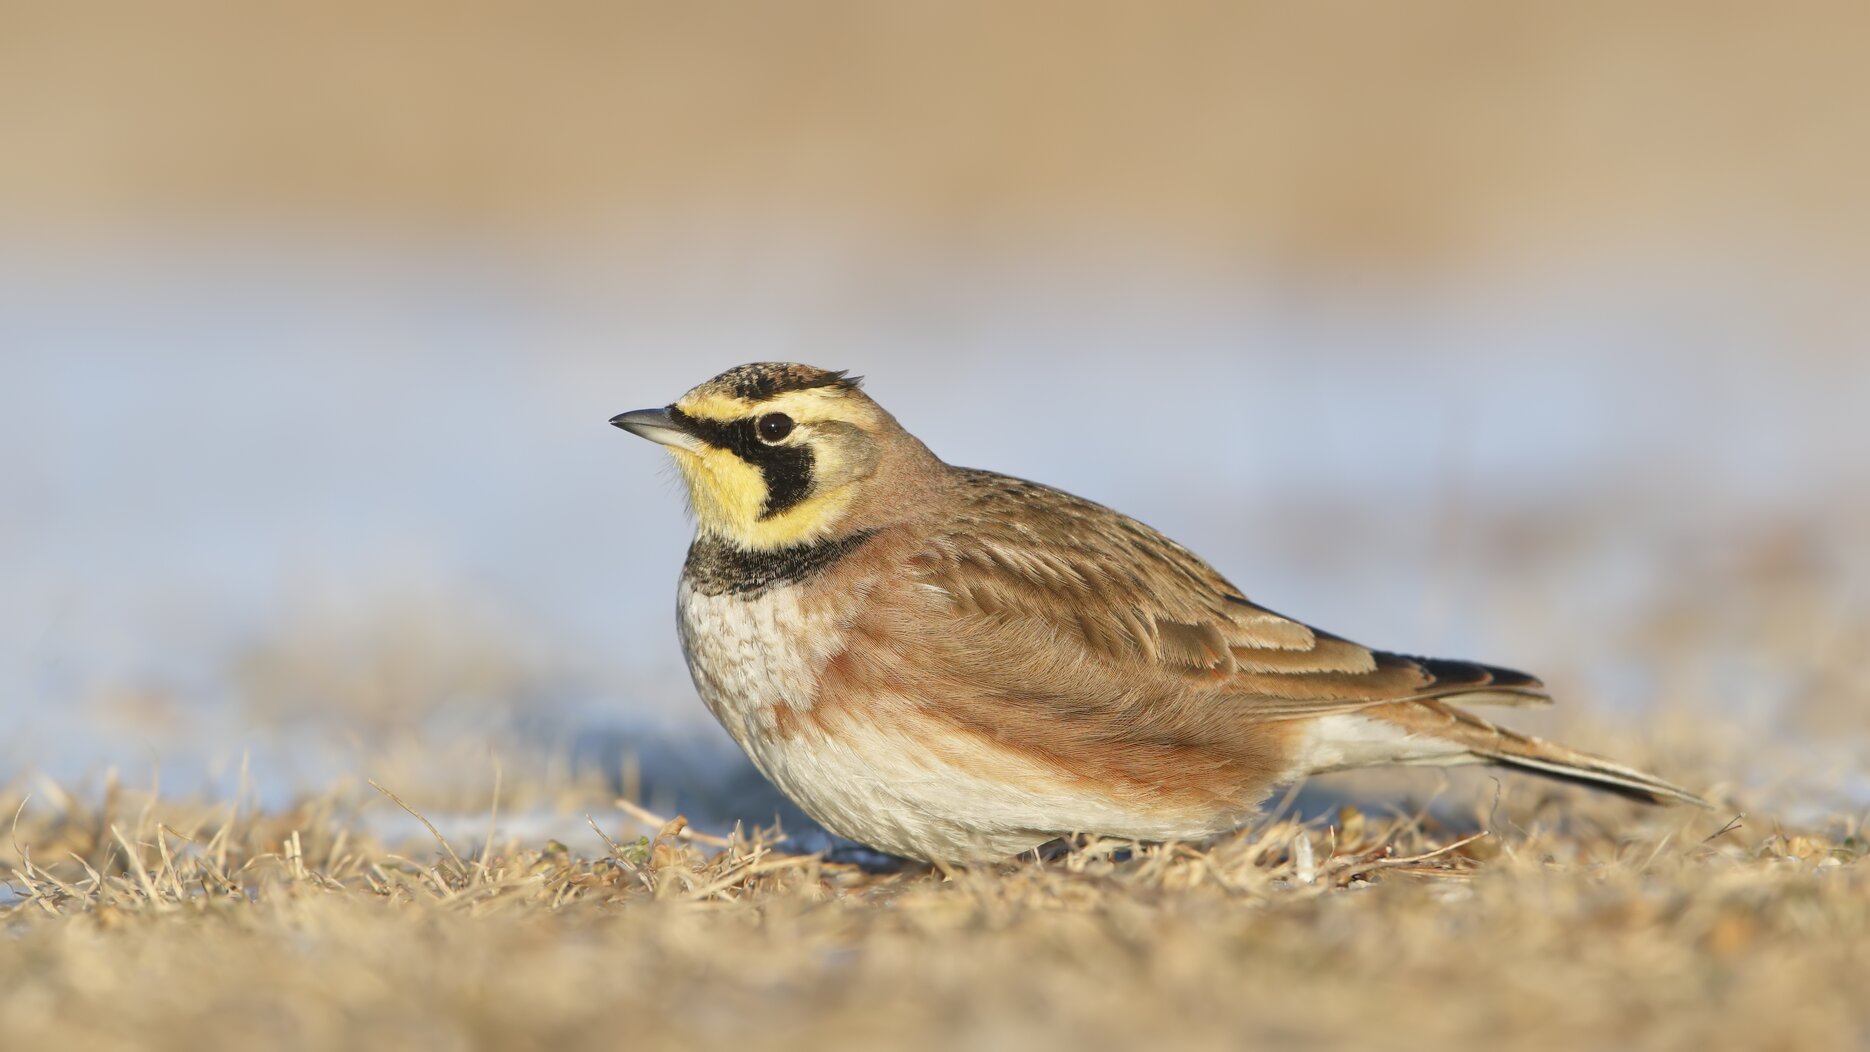 Horned Larks may be joined by Snow Buntings or Lapland Longspurs at Great Kills Park in the wintertime. Photo: Isaac Grant